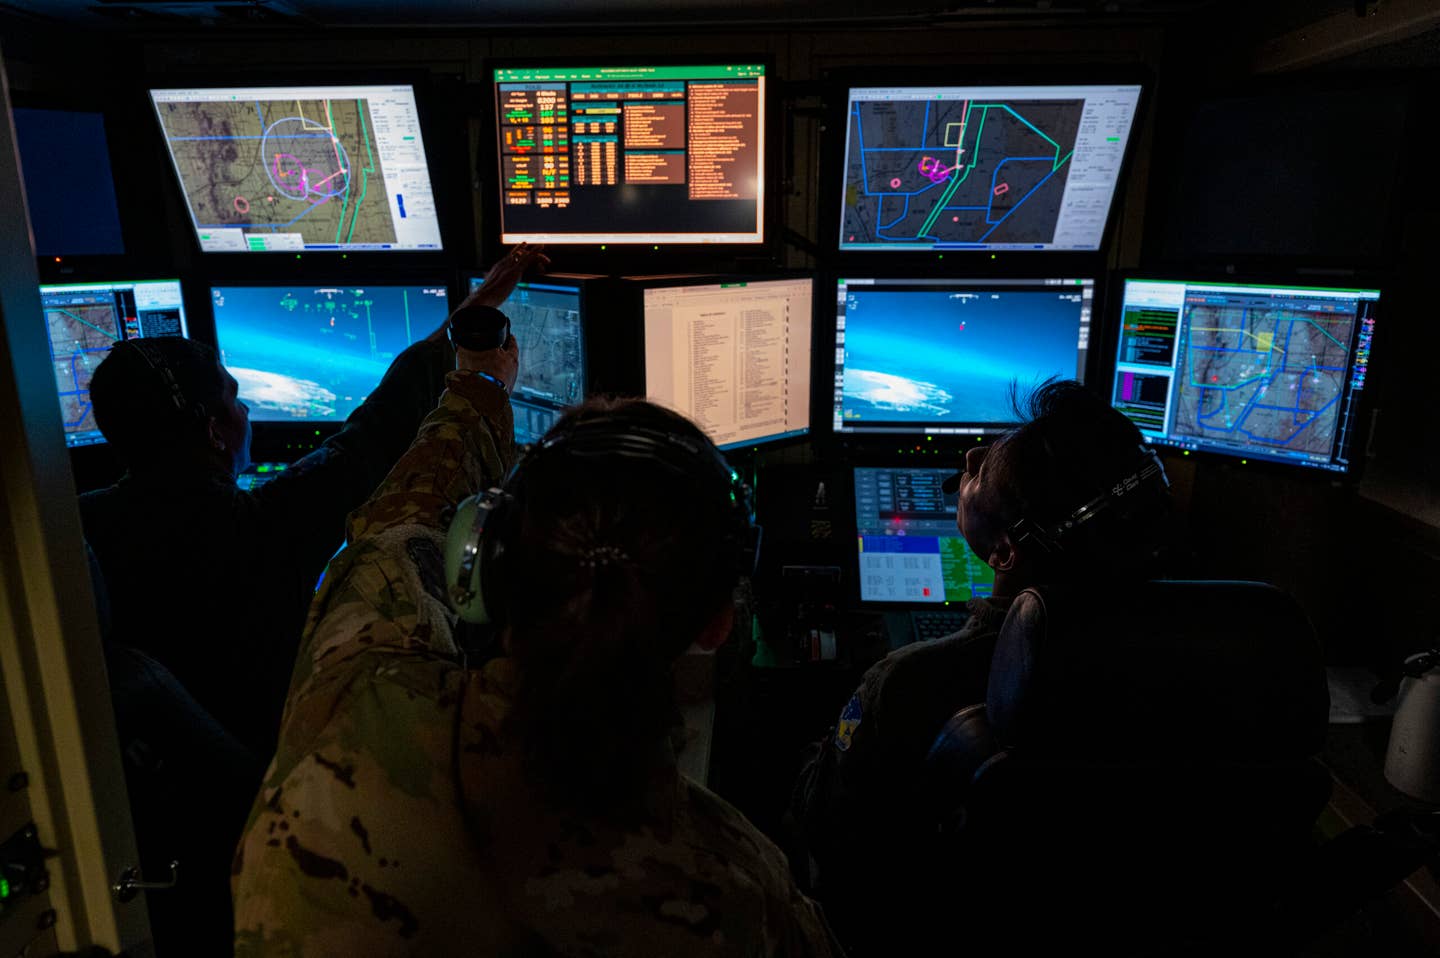 U.S. Air Force MQ-9 operators during a training flight in a ground control station, Holloman Air Force Base, New Mexico, Oct. 13, 2022. <em>Credit: U.S. Air Force photo by Airman 1st Class Isaiah Pedrazzini</em>